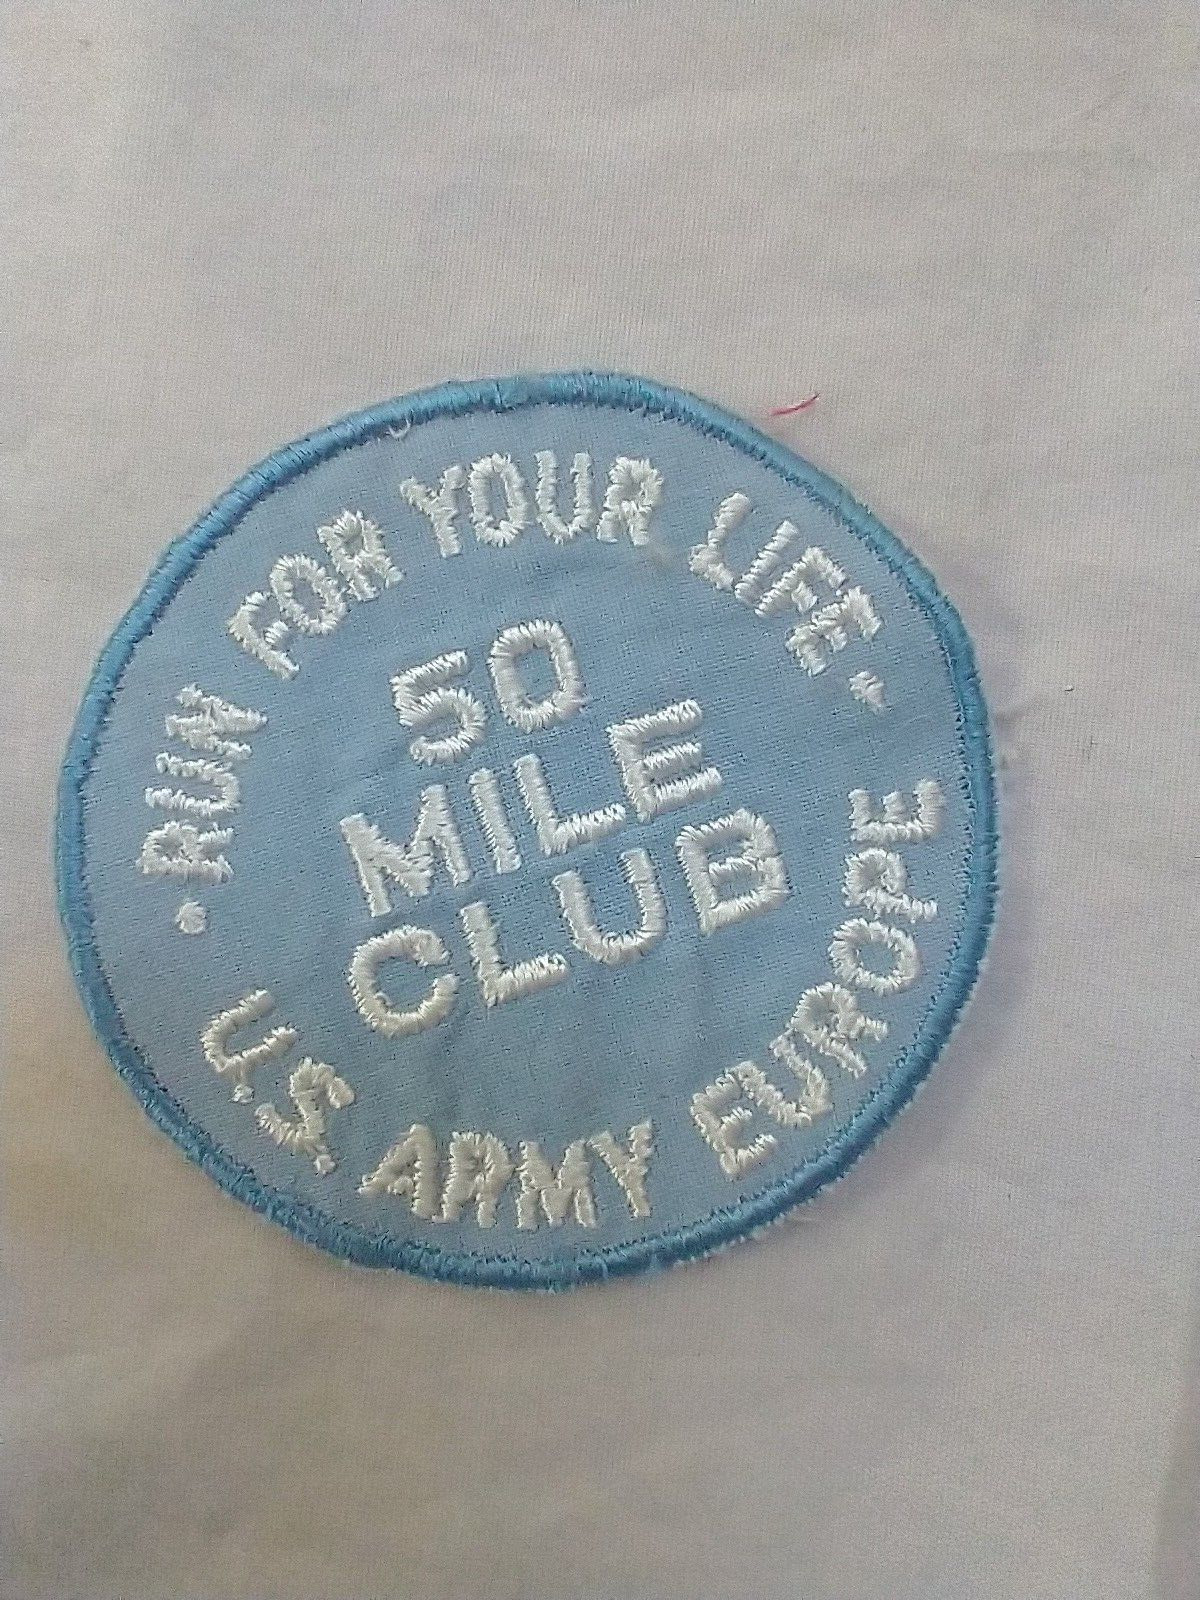 U.S. Army Europe- Run For Your Life, 50 Mile Club Patch- Cold War Vintage